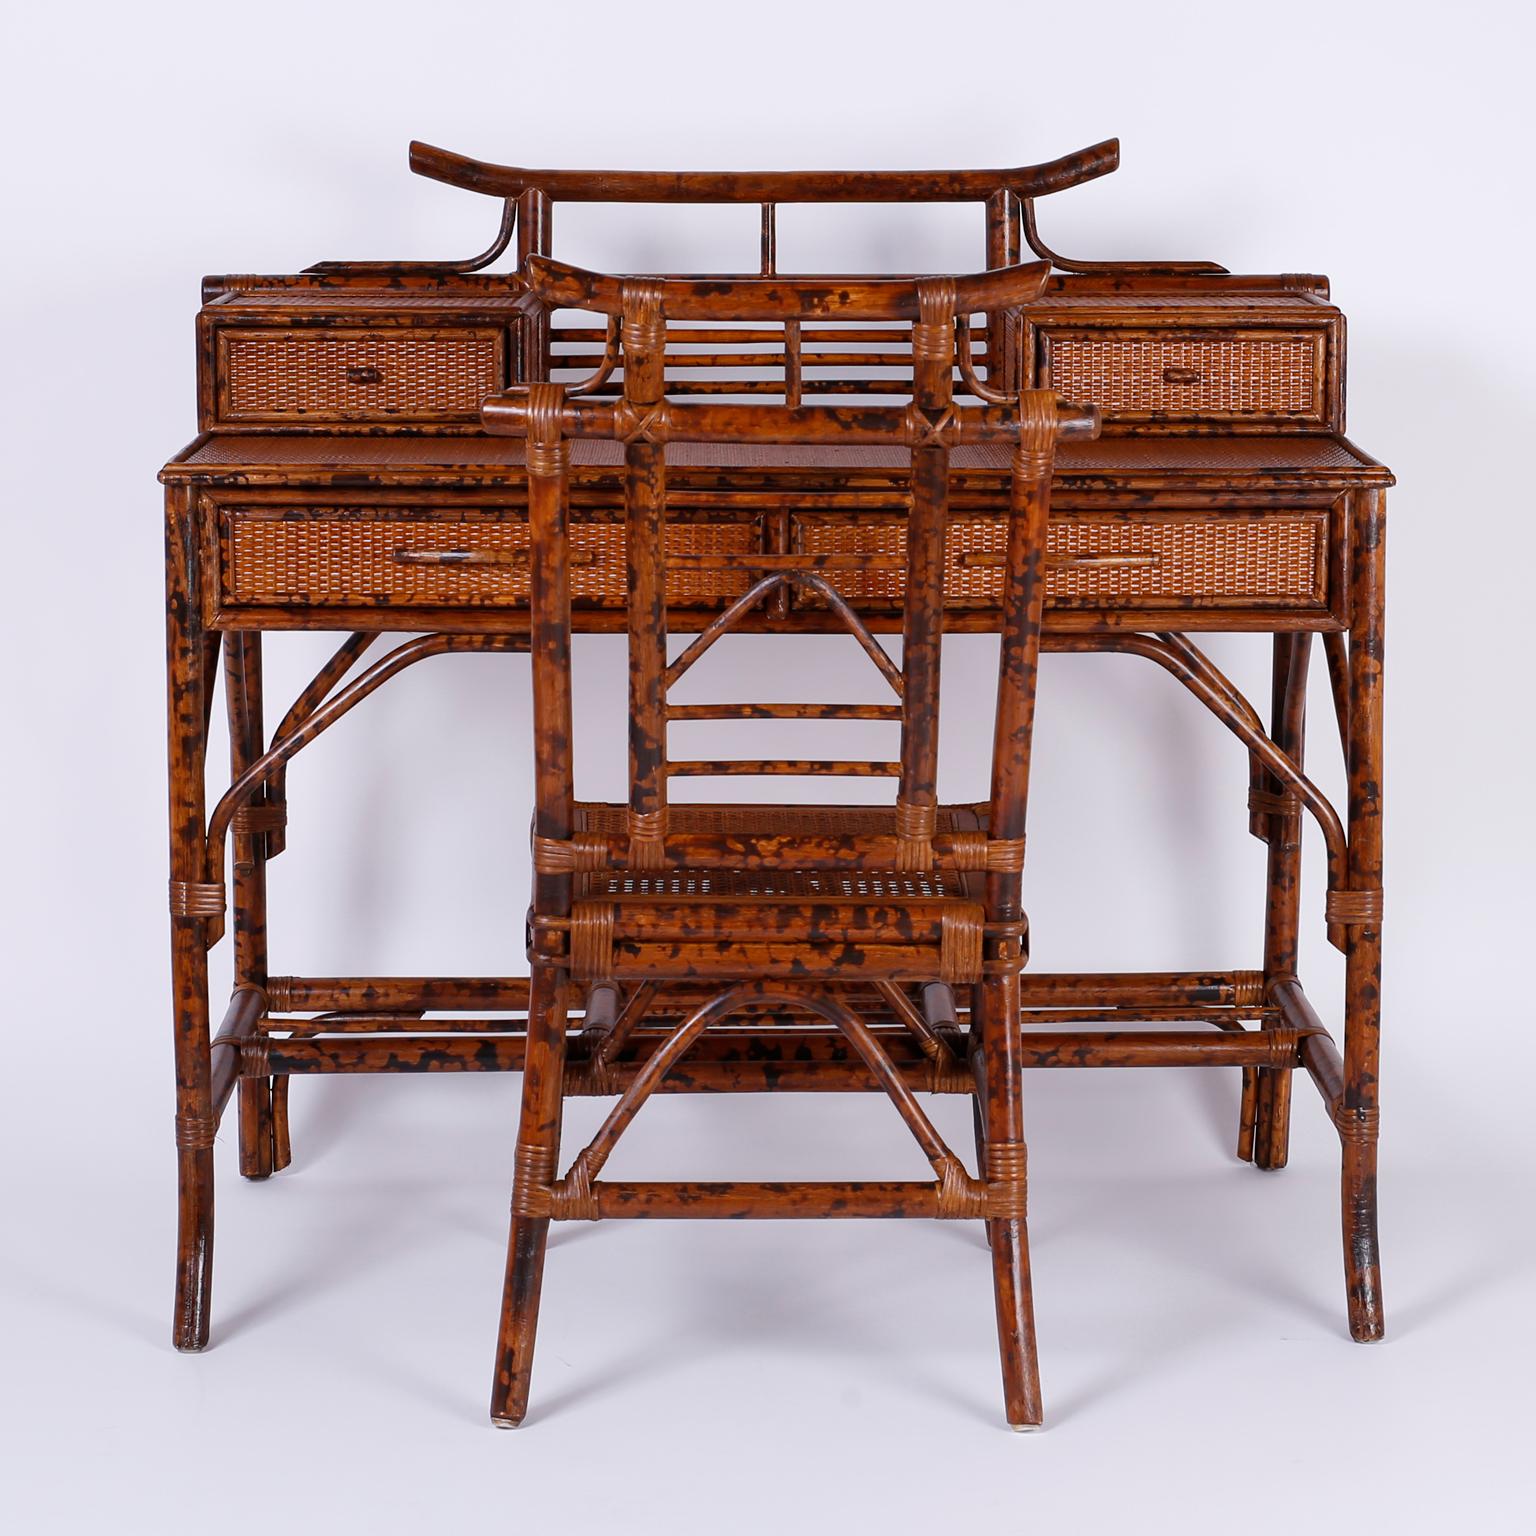 Midcentury faux tortoise and grass cloth desk with a hip Asian modern form featuring a pagoda gallery over two glove boxes, a case with two drawers, elegant legs with support brackets and a matching caned seat chair.

Measures: Desk: H 40, W 41.5,